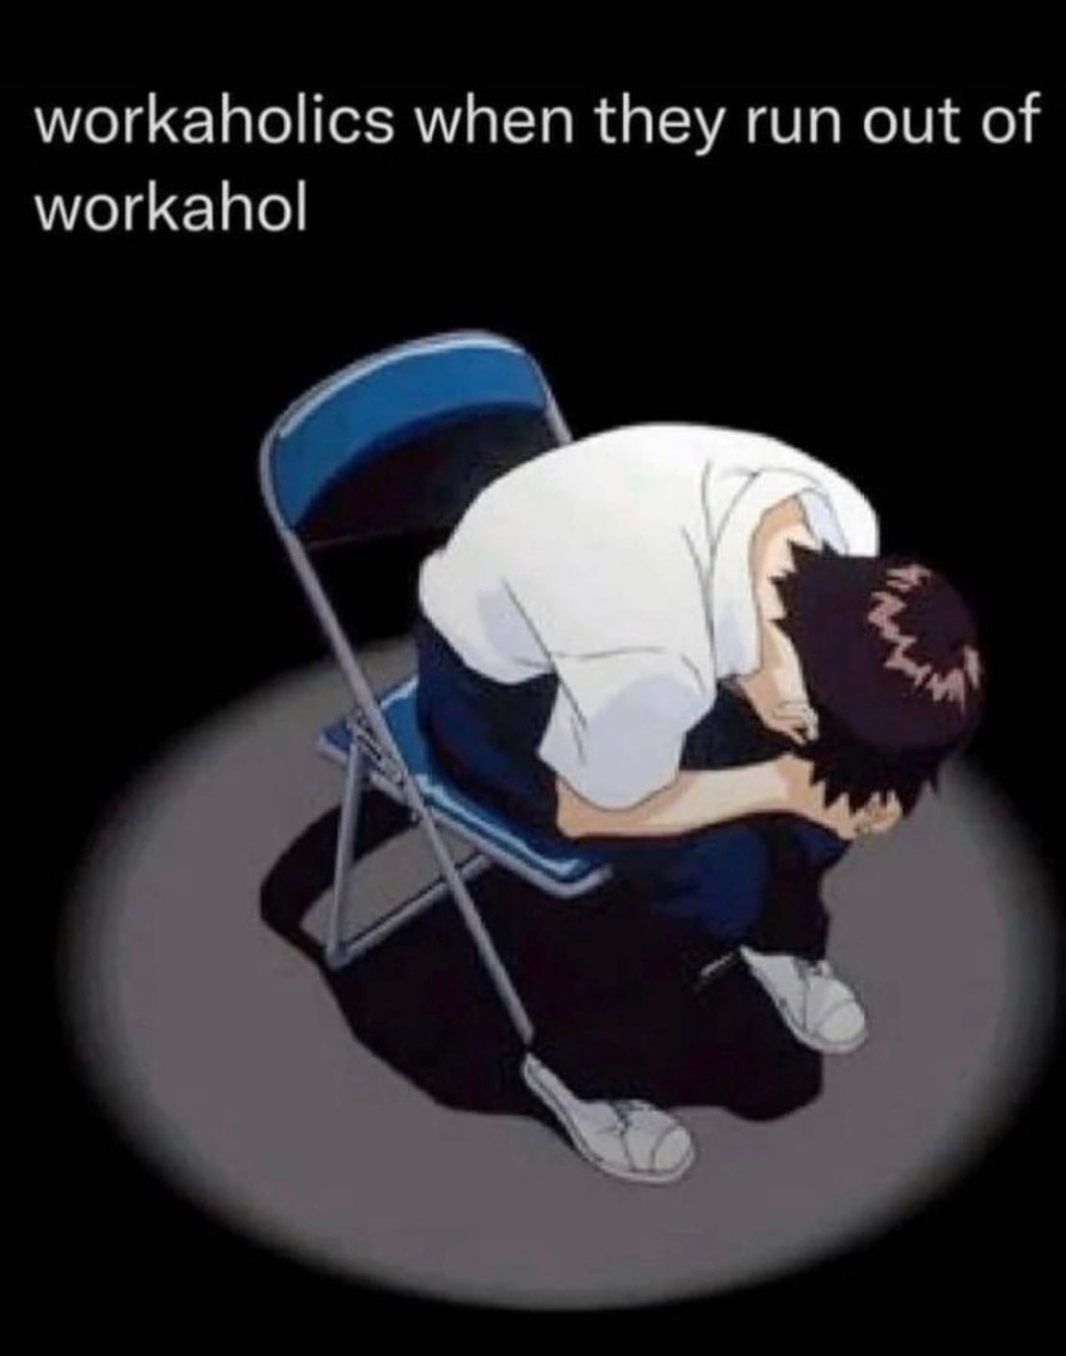 shinji ikari - workaholics when they run out of workahol